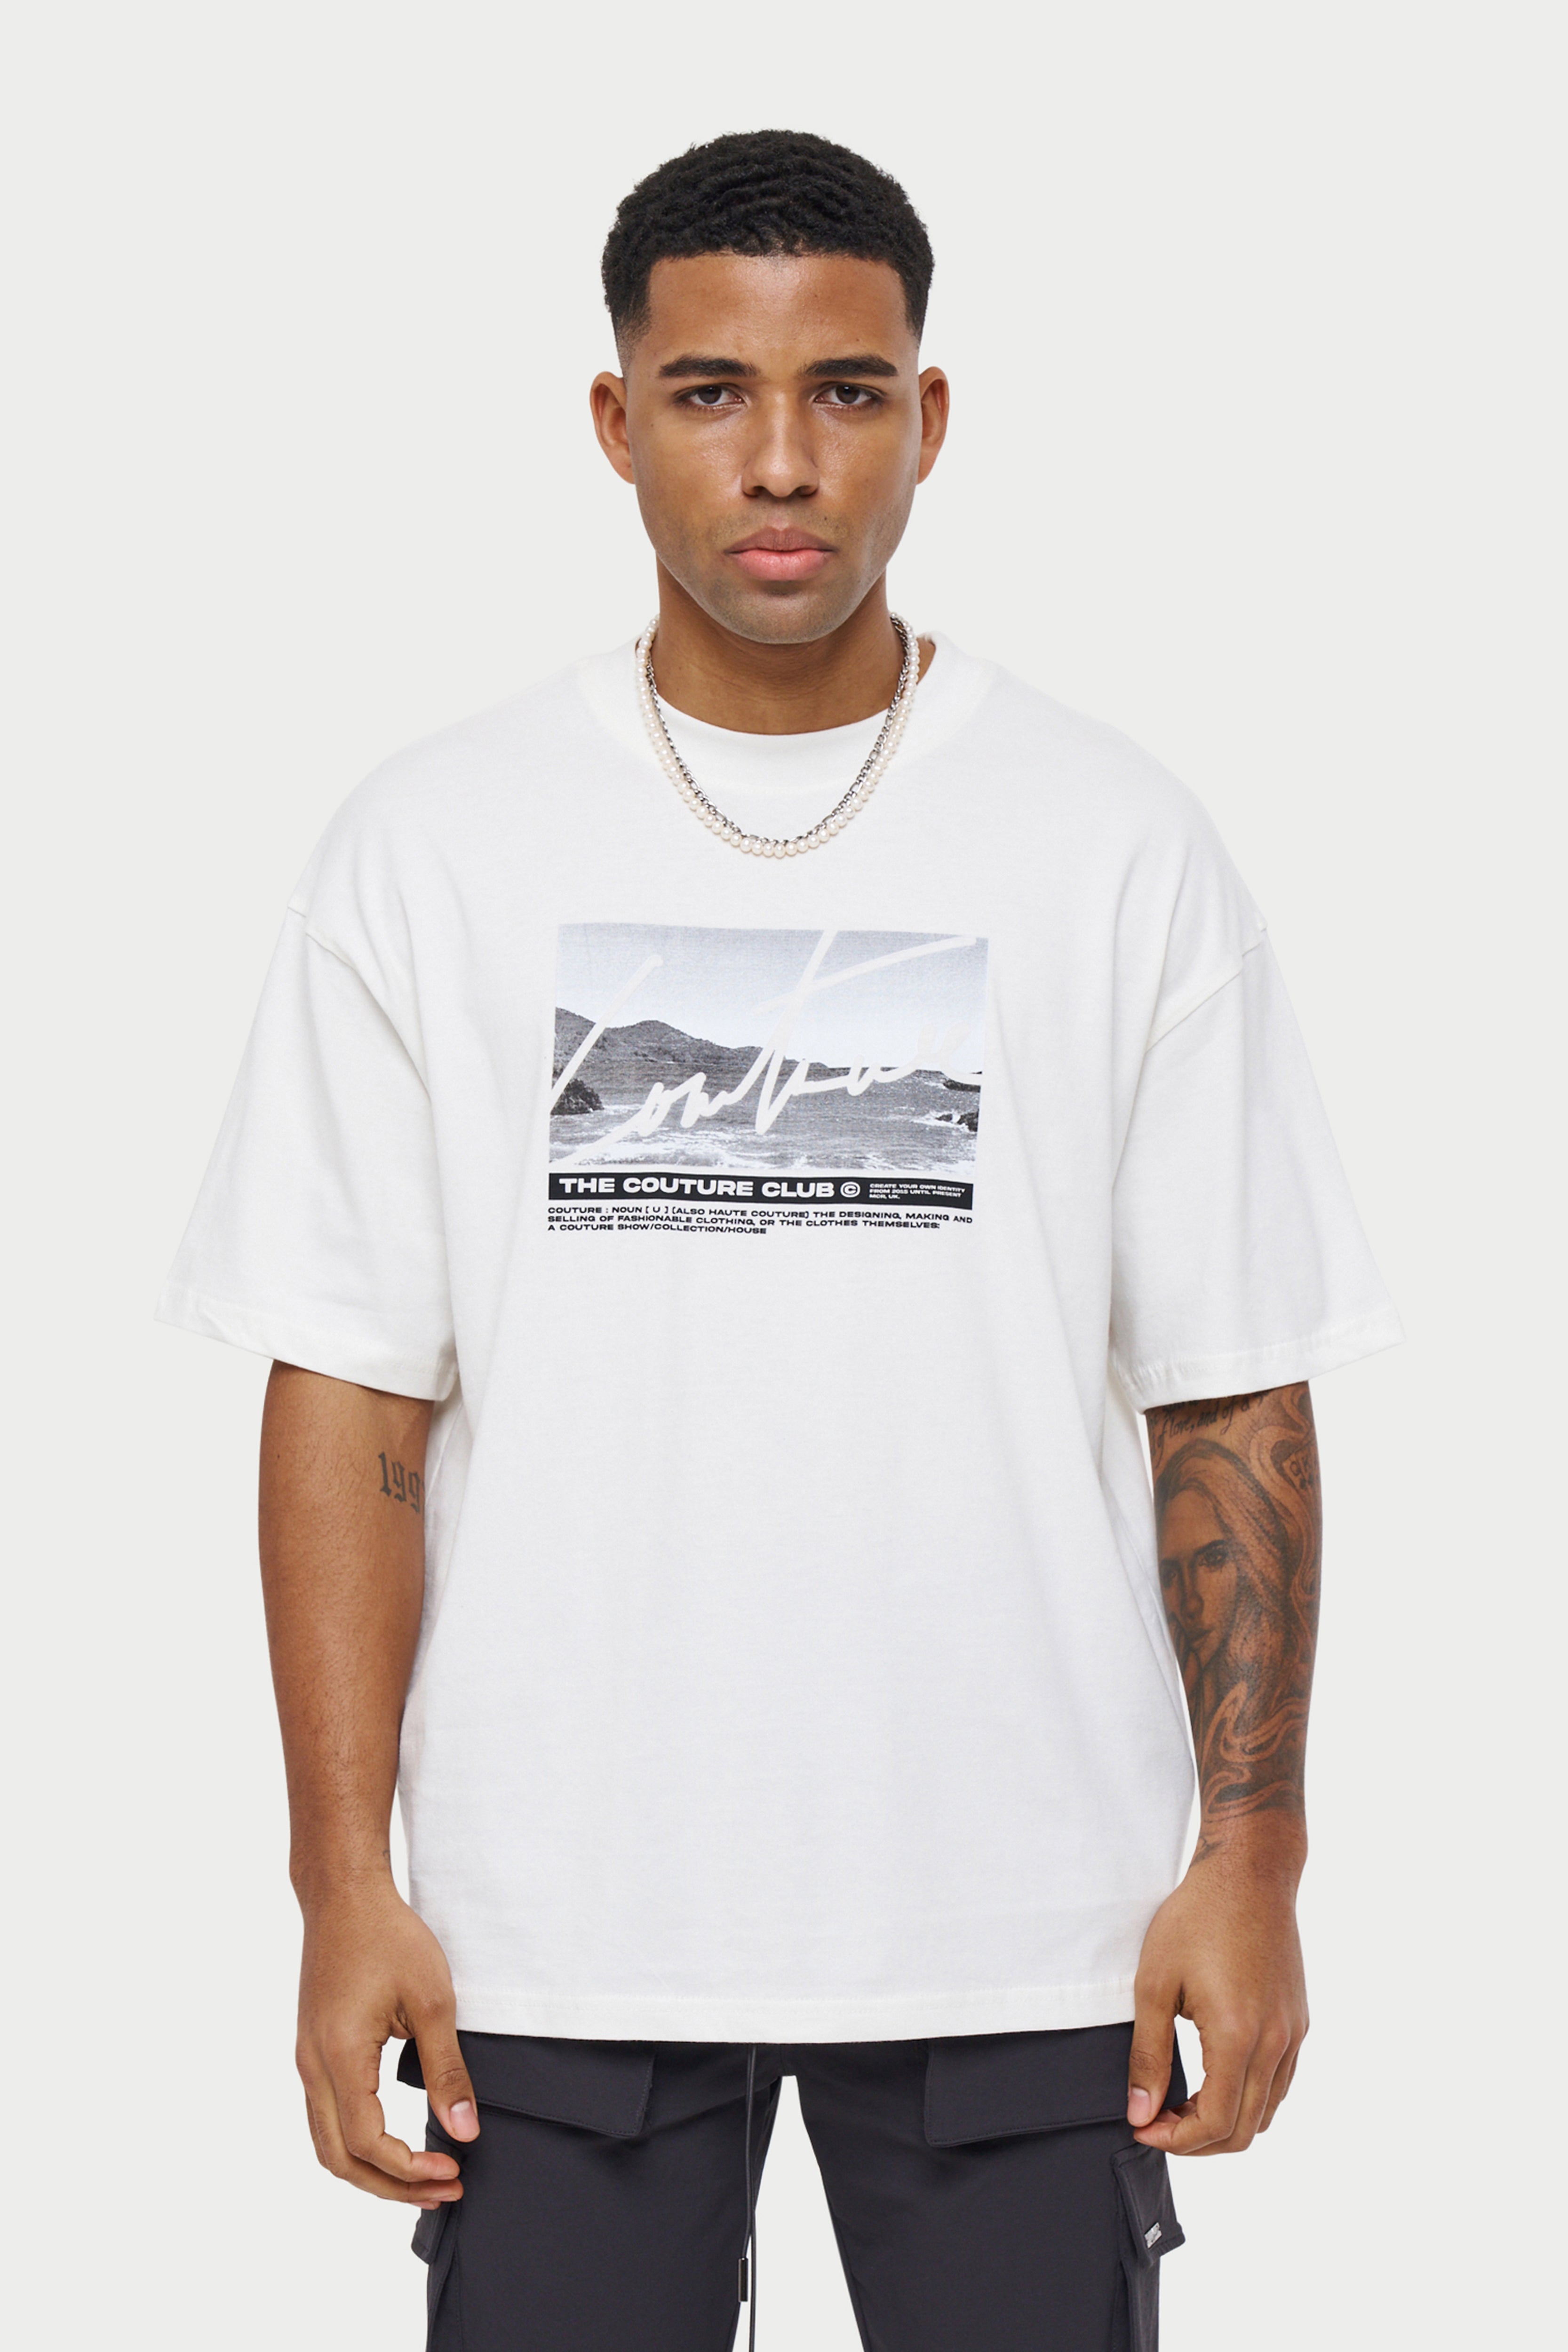 Beregning Kvittering Samme PHOTO GRAPHIC RELAXED FIT T SHIRT - OFF WHITE